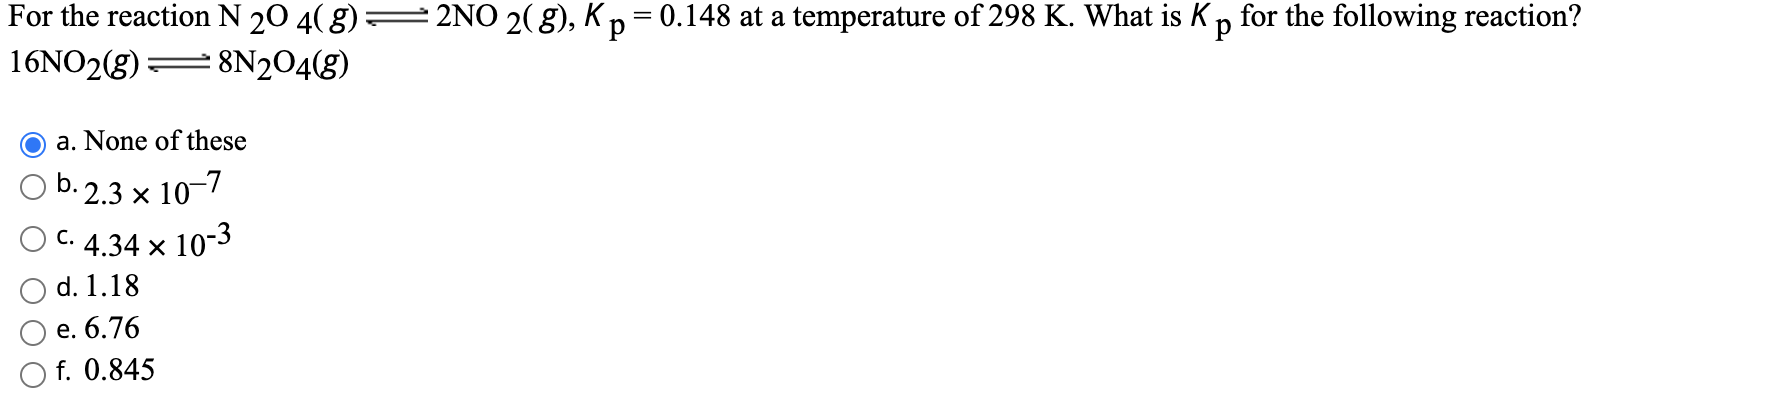 For the reaction N 20 4( g)
2NO 2(8), Kp= 0.148 at a temperature of 298 K. What is Kp for the following reaction?
16NO2(g)
8N2O4(g)
a. None of these
b. 2.3 x 10-7
C. 4.34 x 10-3
d. 1.18
е. 6.76
f. 0.845
